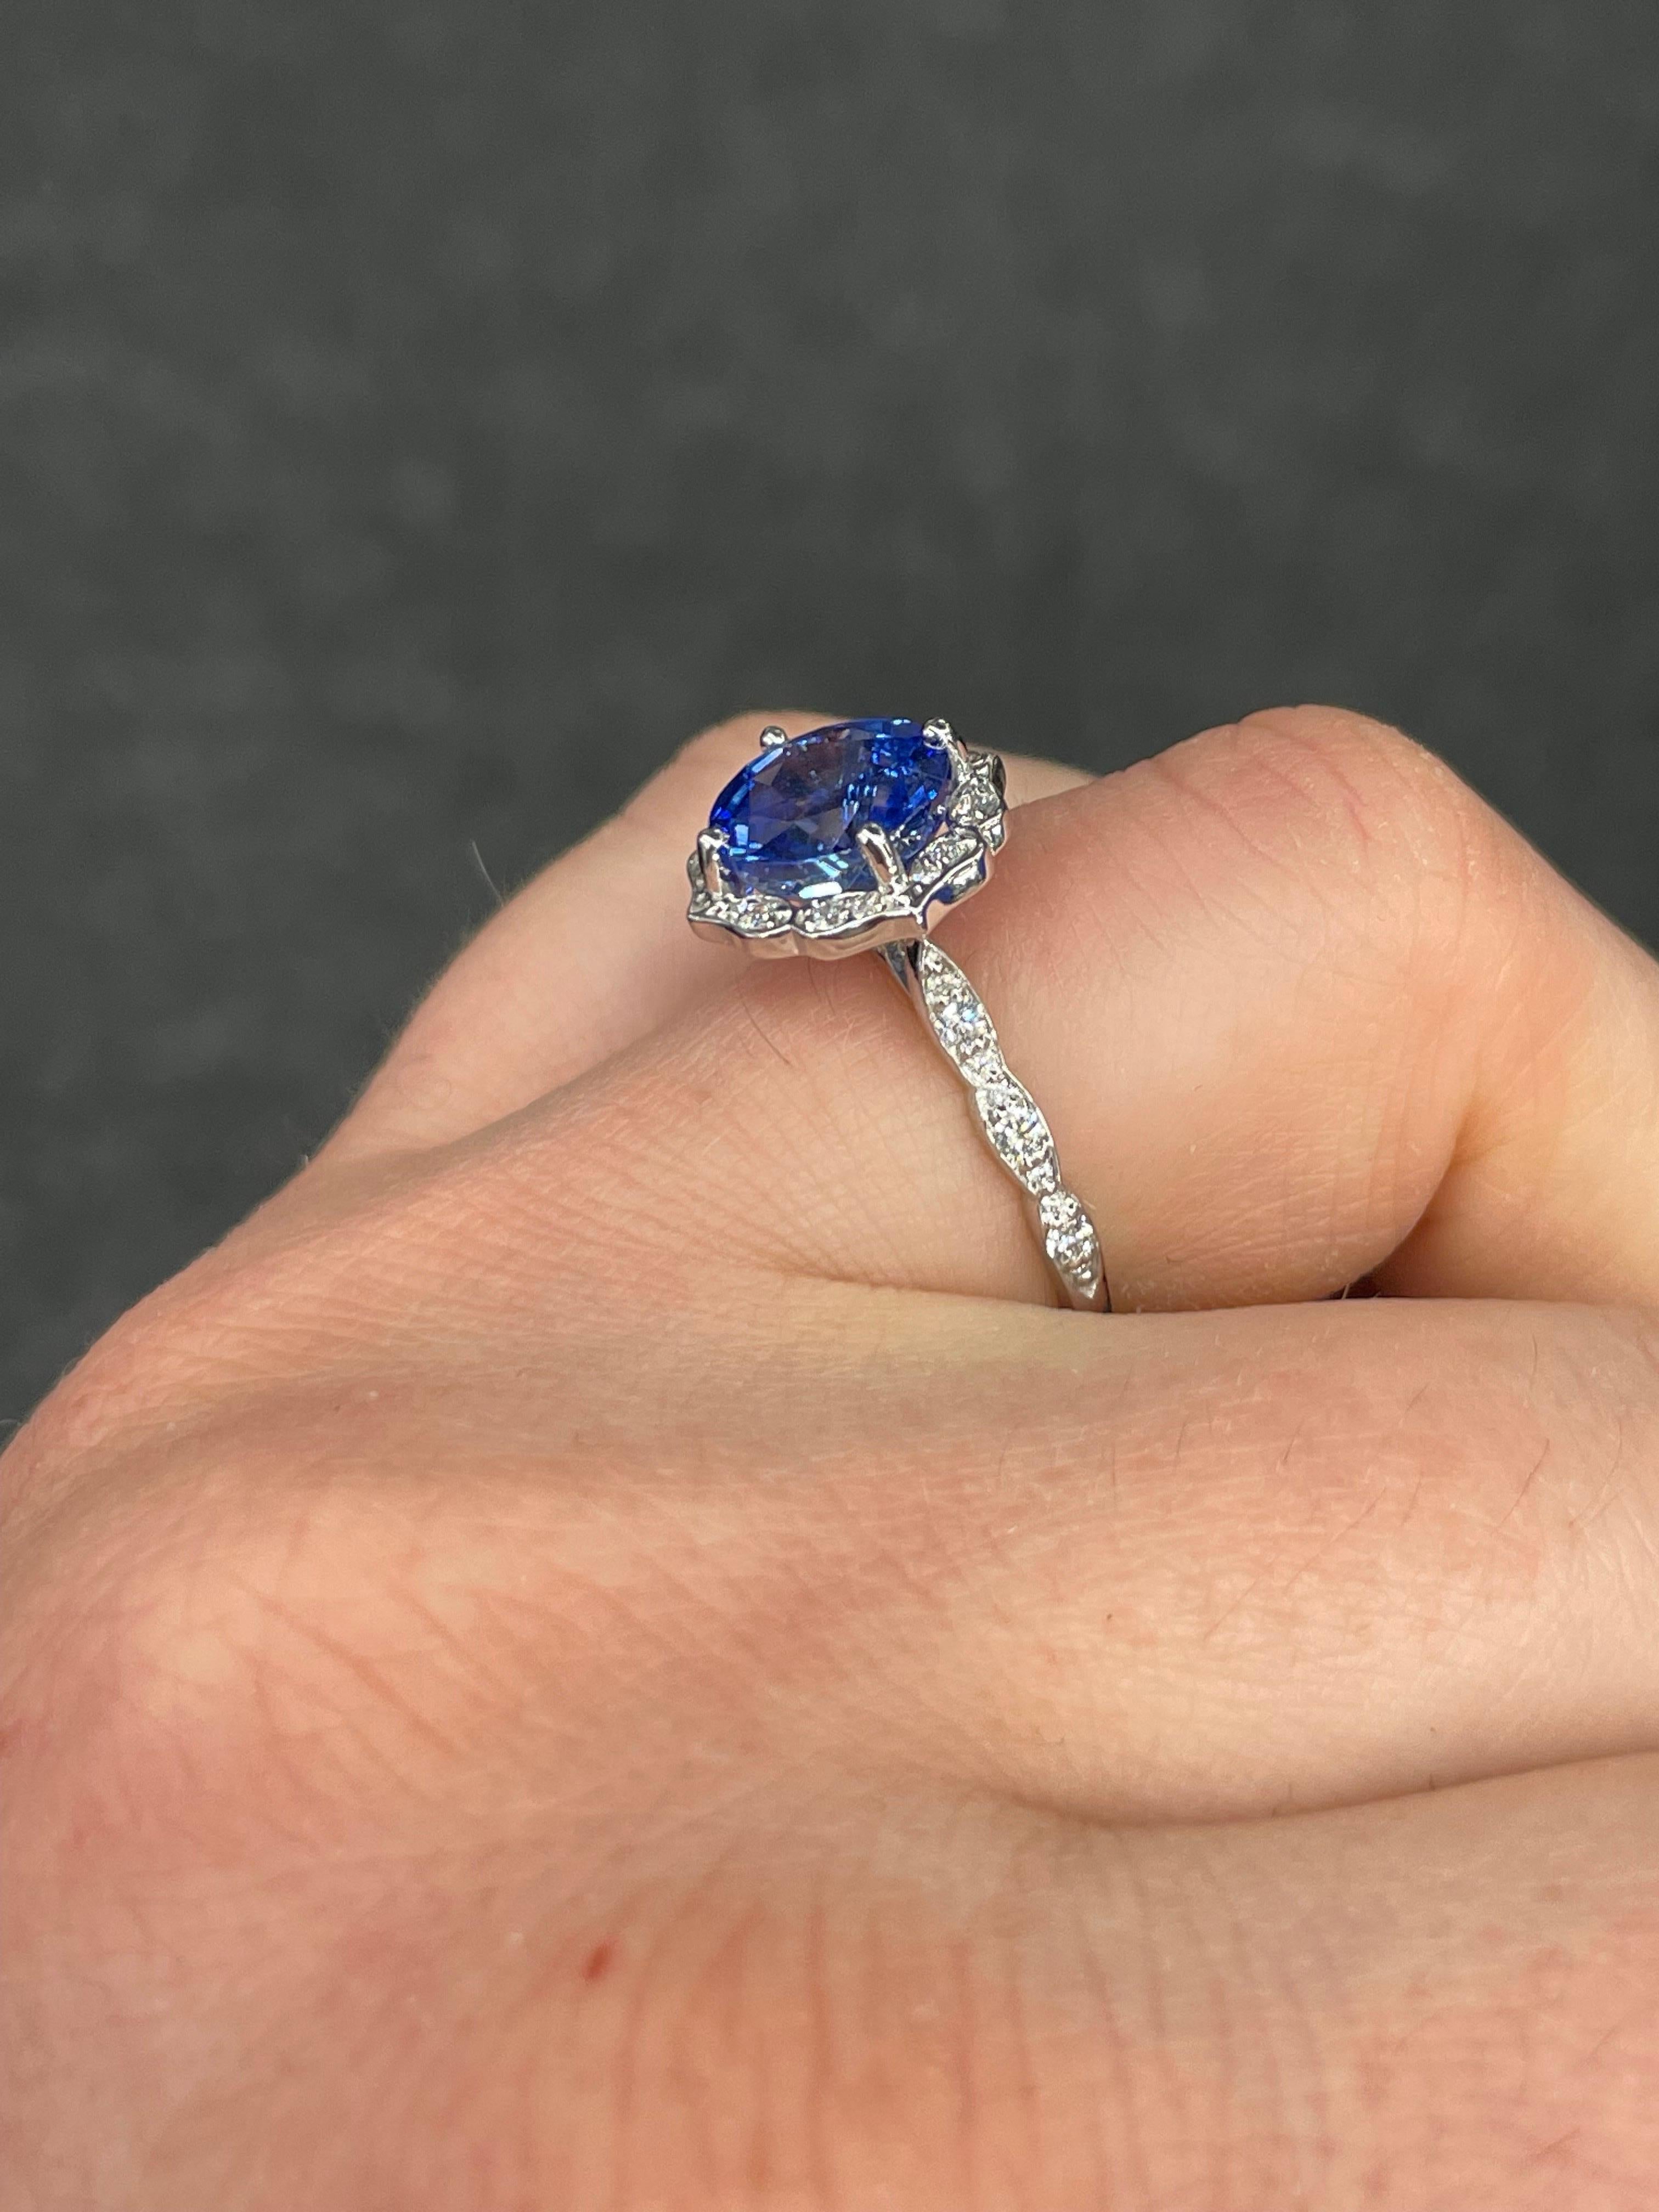 Women's Antique Inspired Sapphire Diamond Halo Ring 4.07 Carats 14 Karat White Gold For Sale